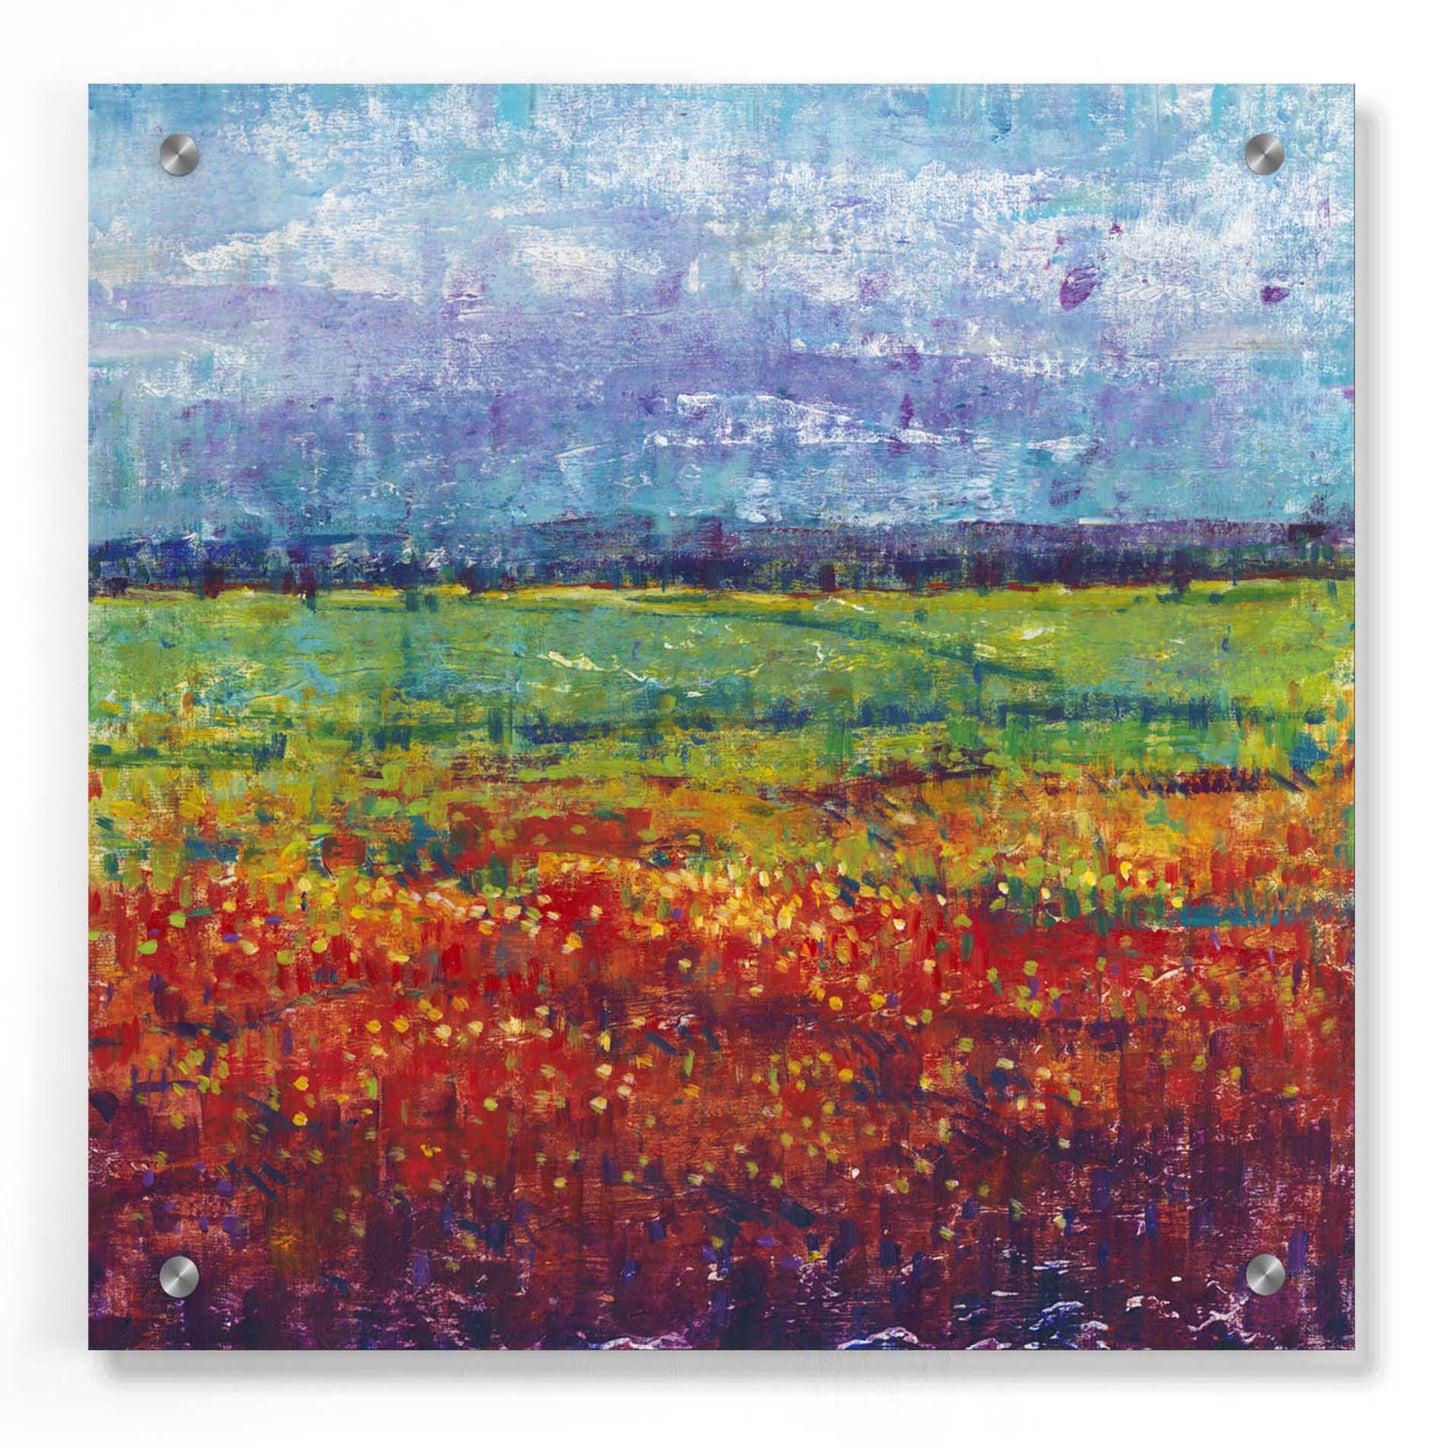 Epic Art 'On Summer Day I' by Tim O'Toole, Acrylic Glass Wall Art,36x36